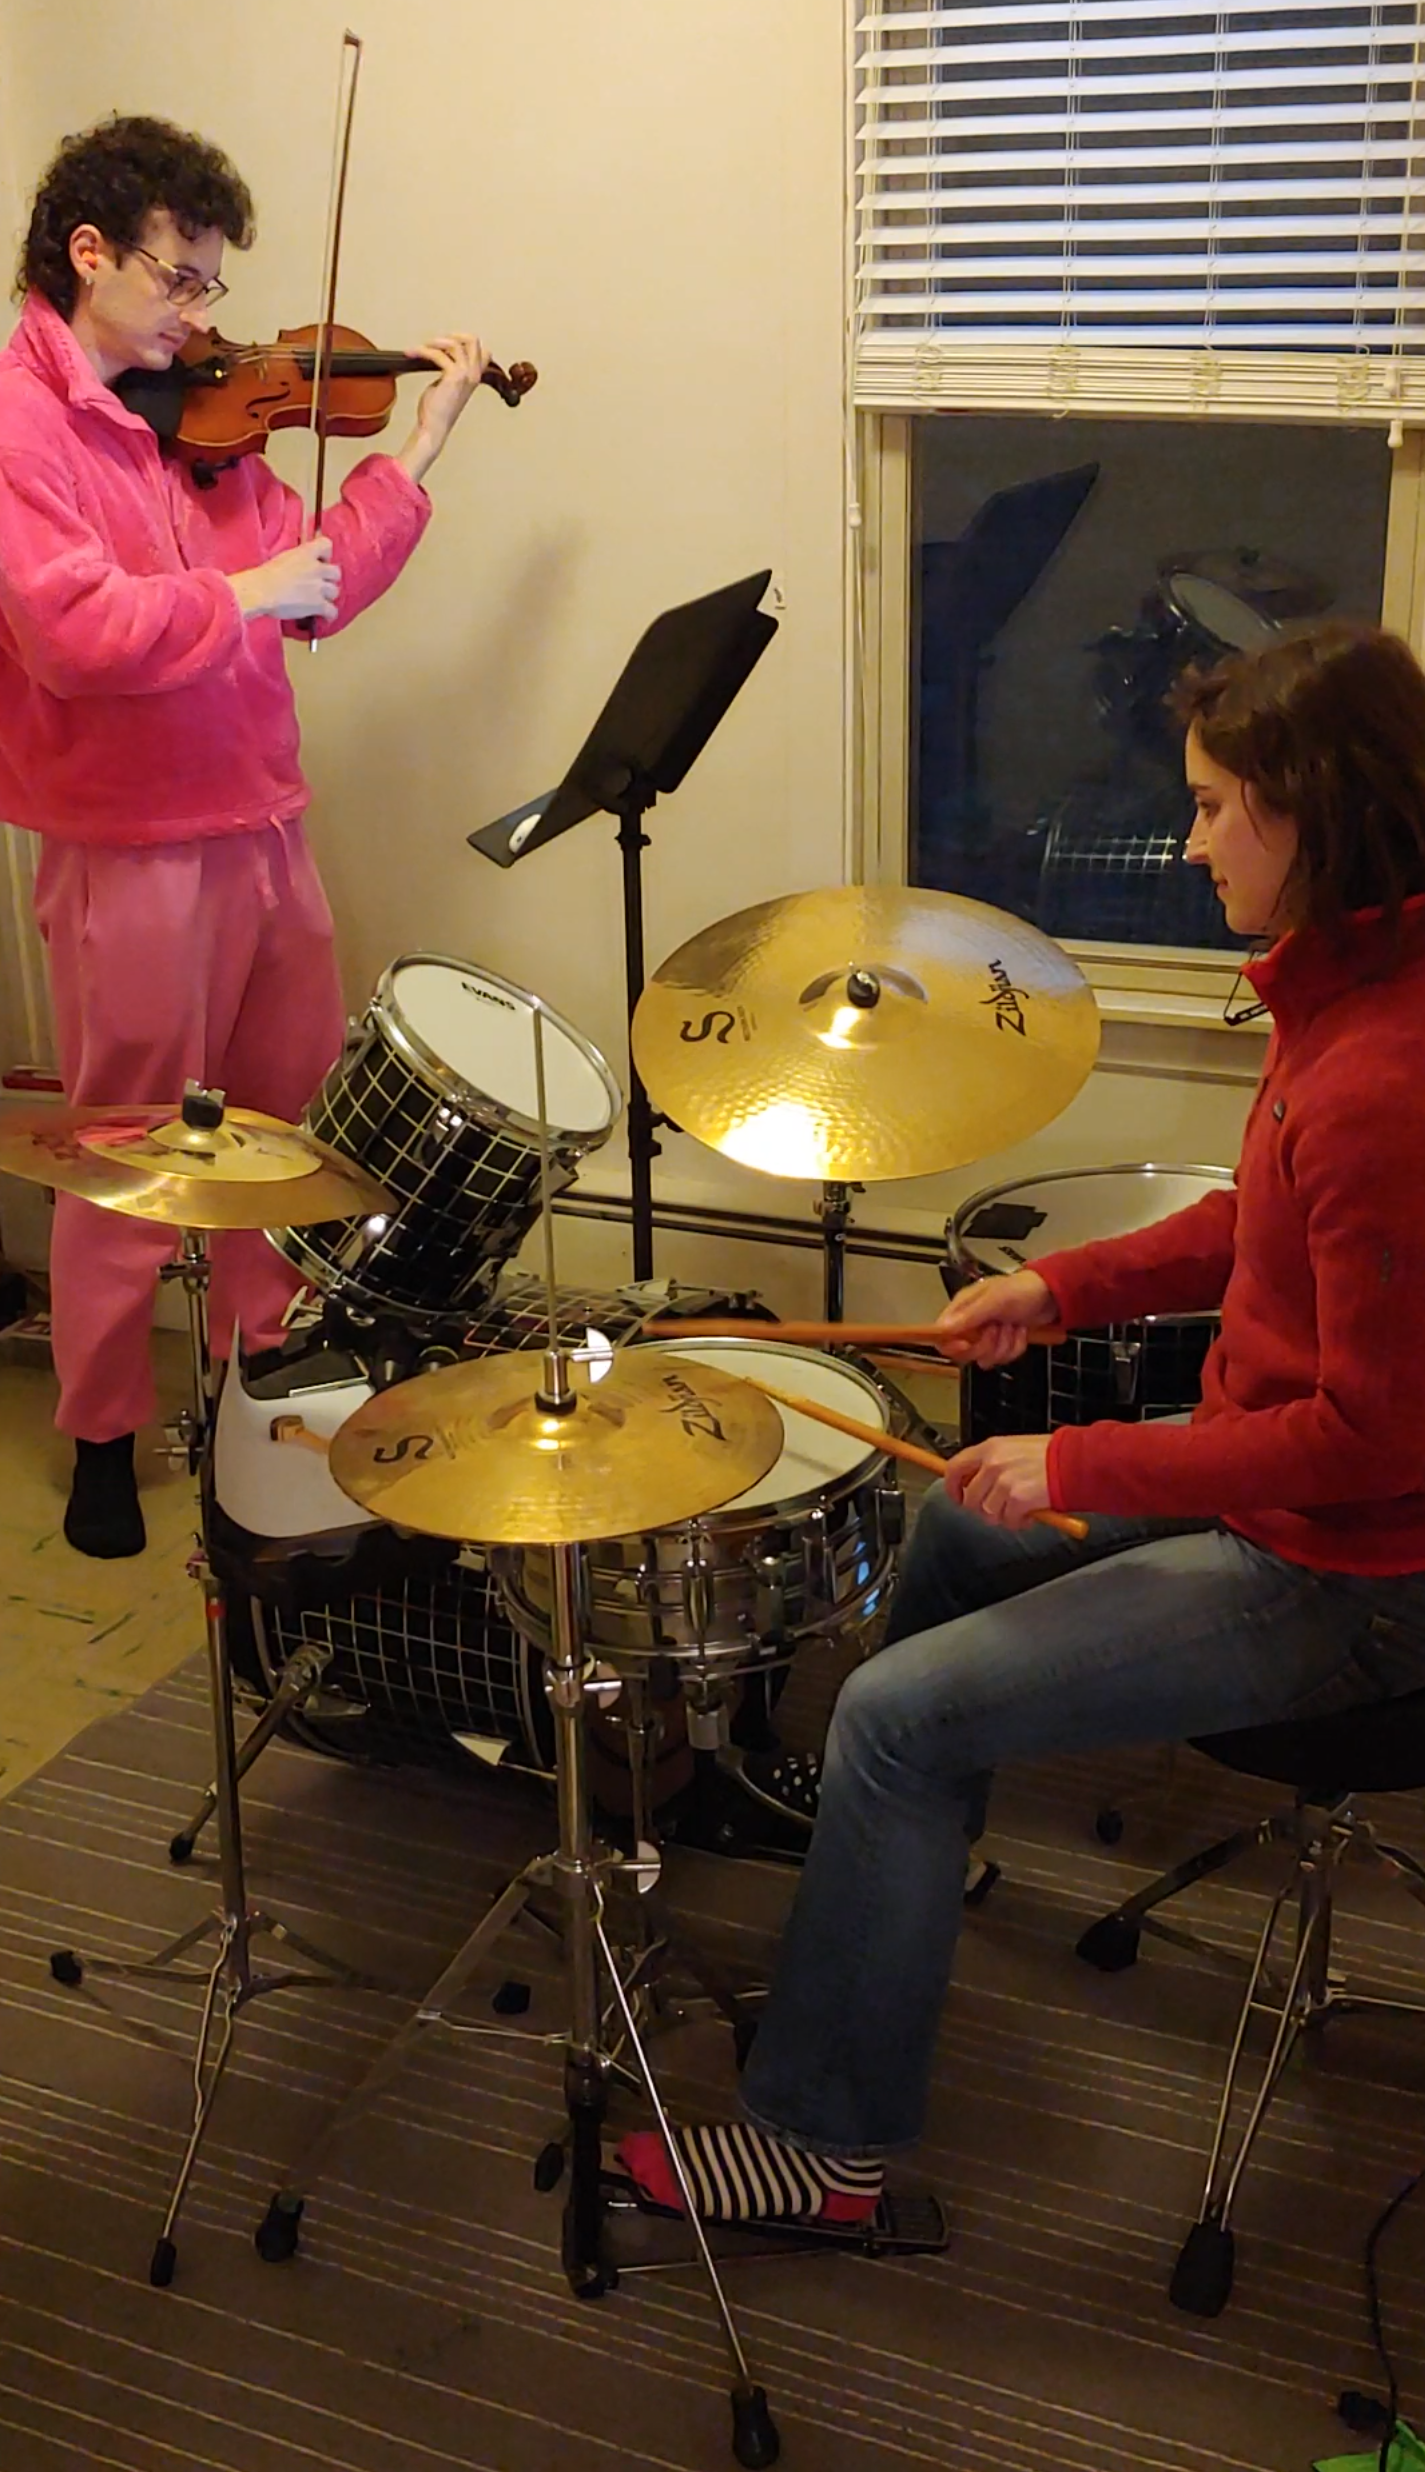  A tall, dark-haired person stands playing violin. A brown-haired woman sits at a drum set, playing the drums. They are in a spare room in a house. 